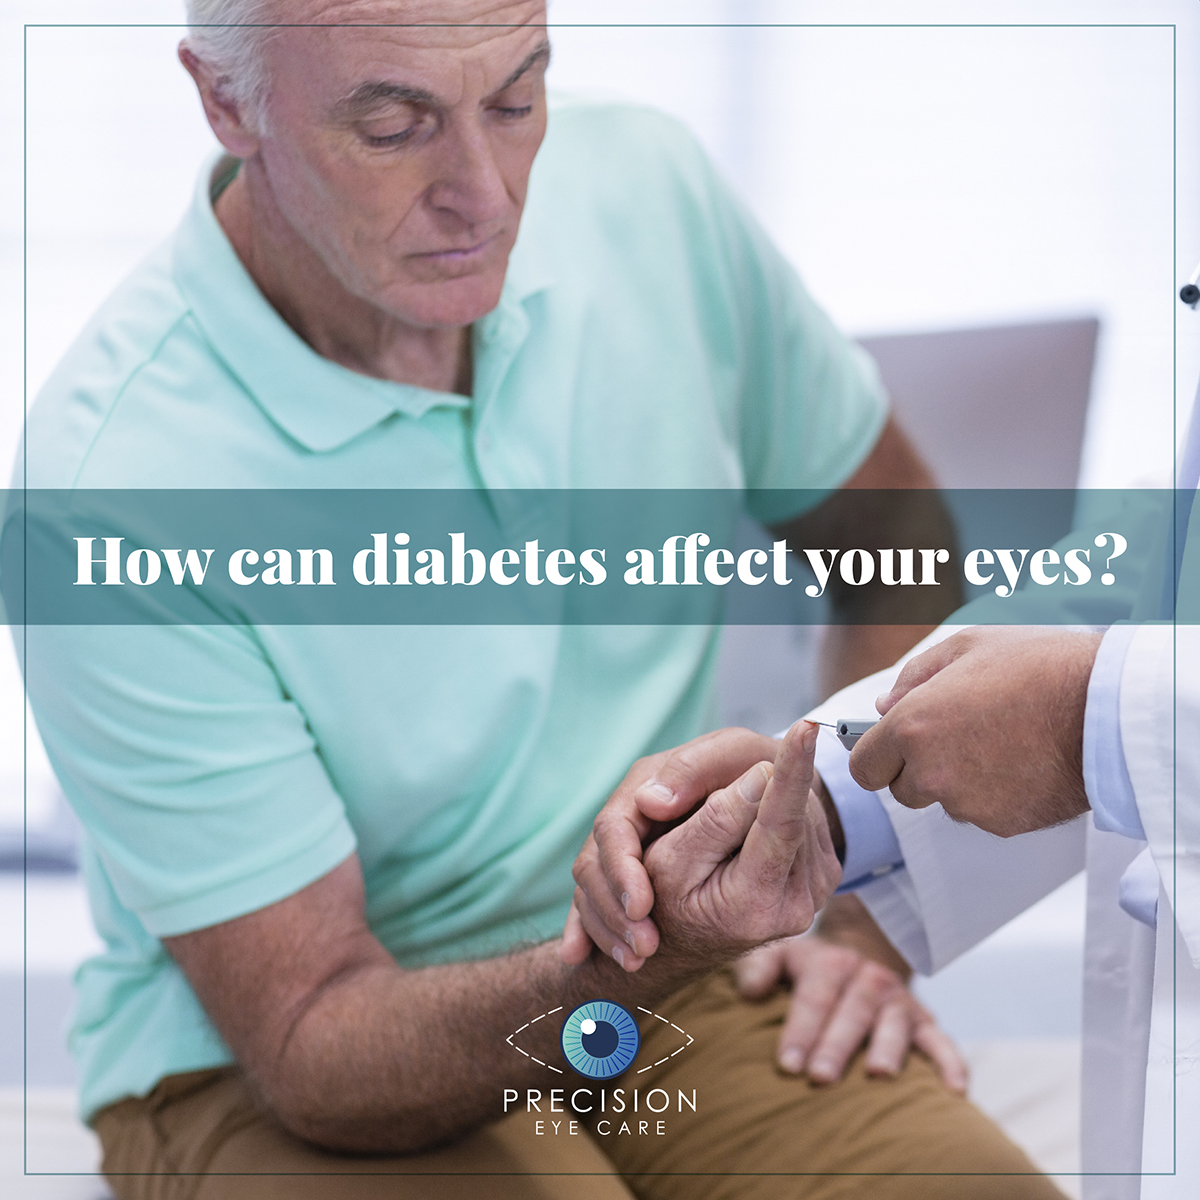 How can diabetes affect your eyes?